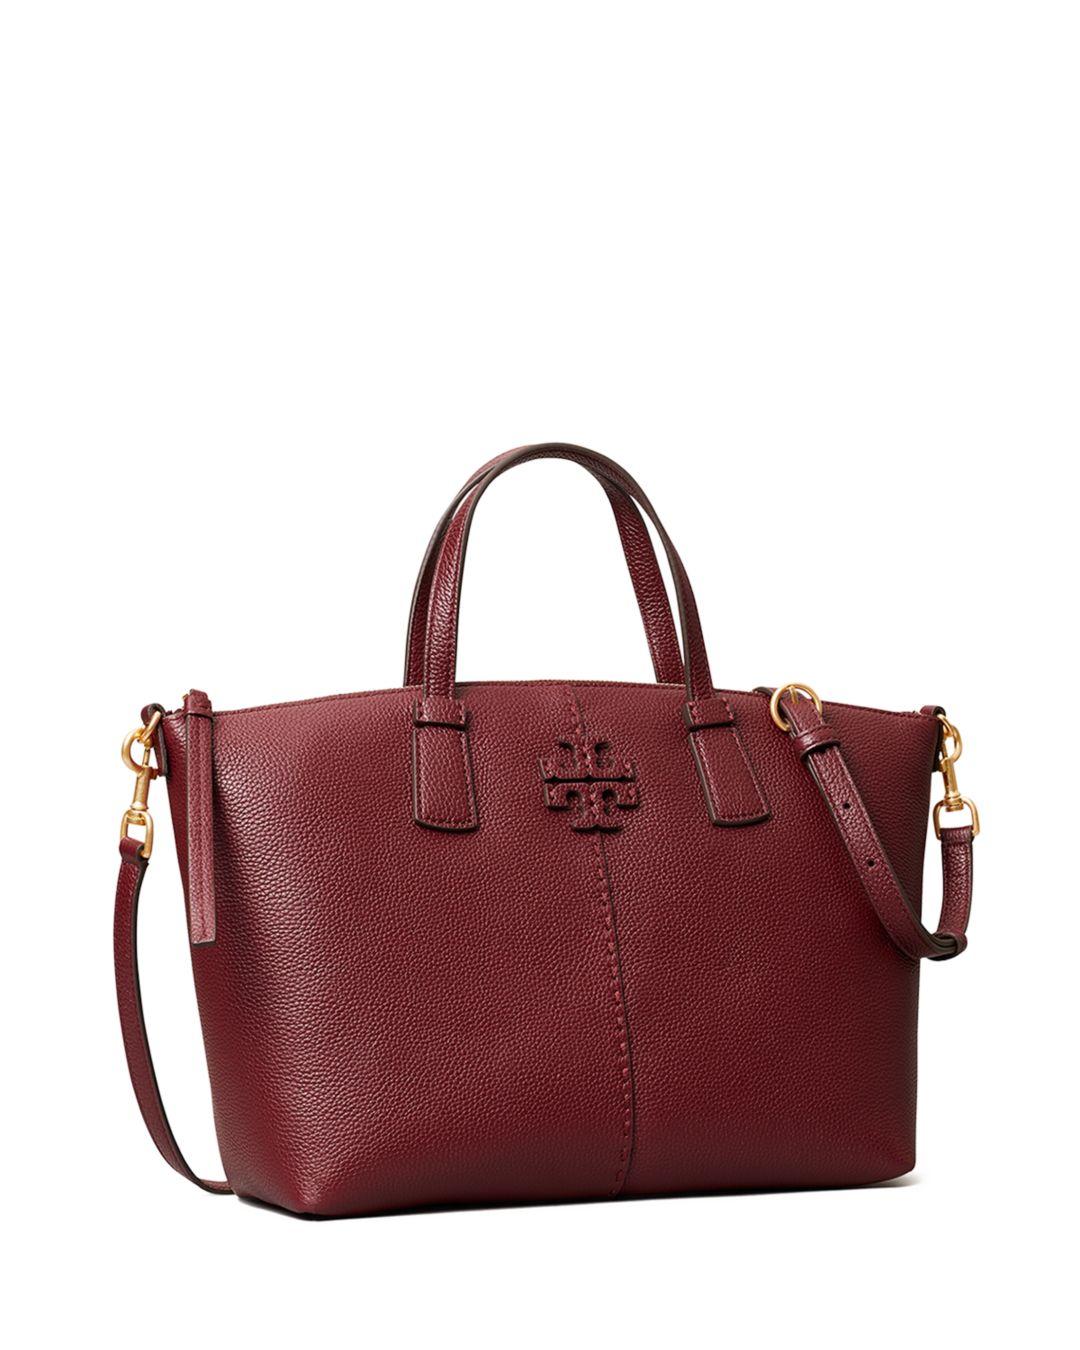 Tory Burch Mcgraw Leather Satchel in Claret/Gold (Black) | Lyst